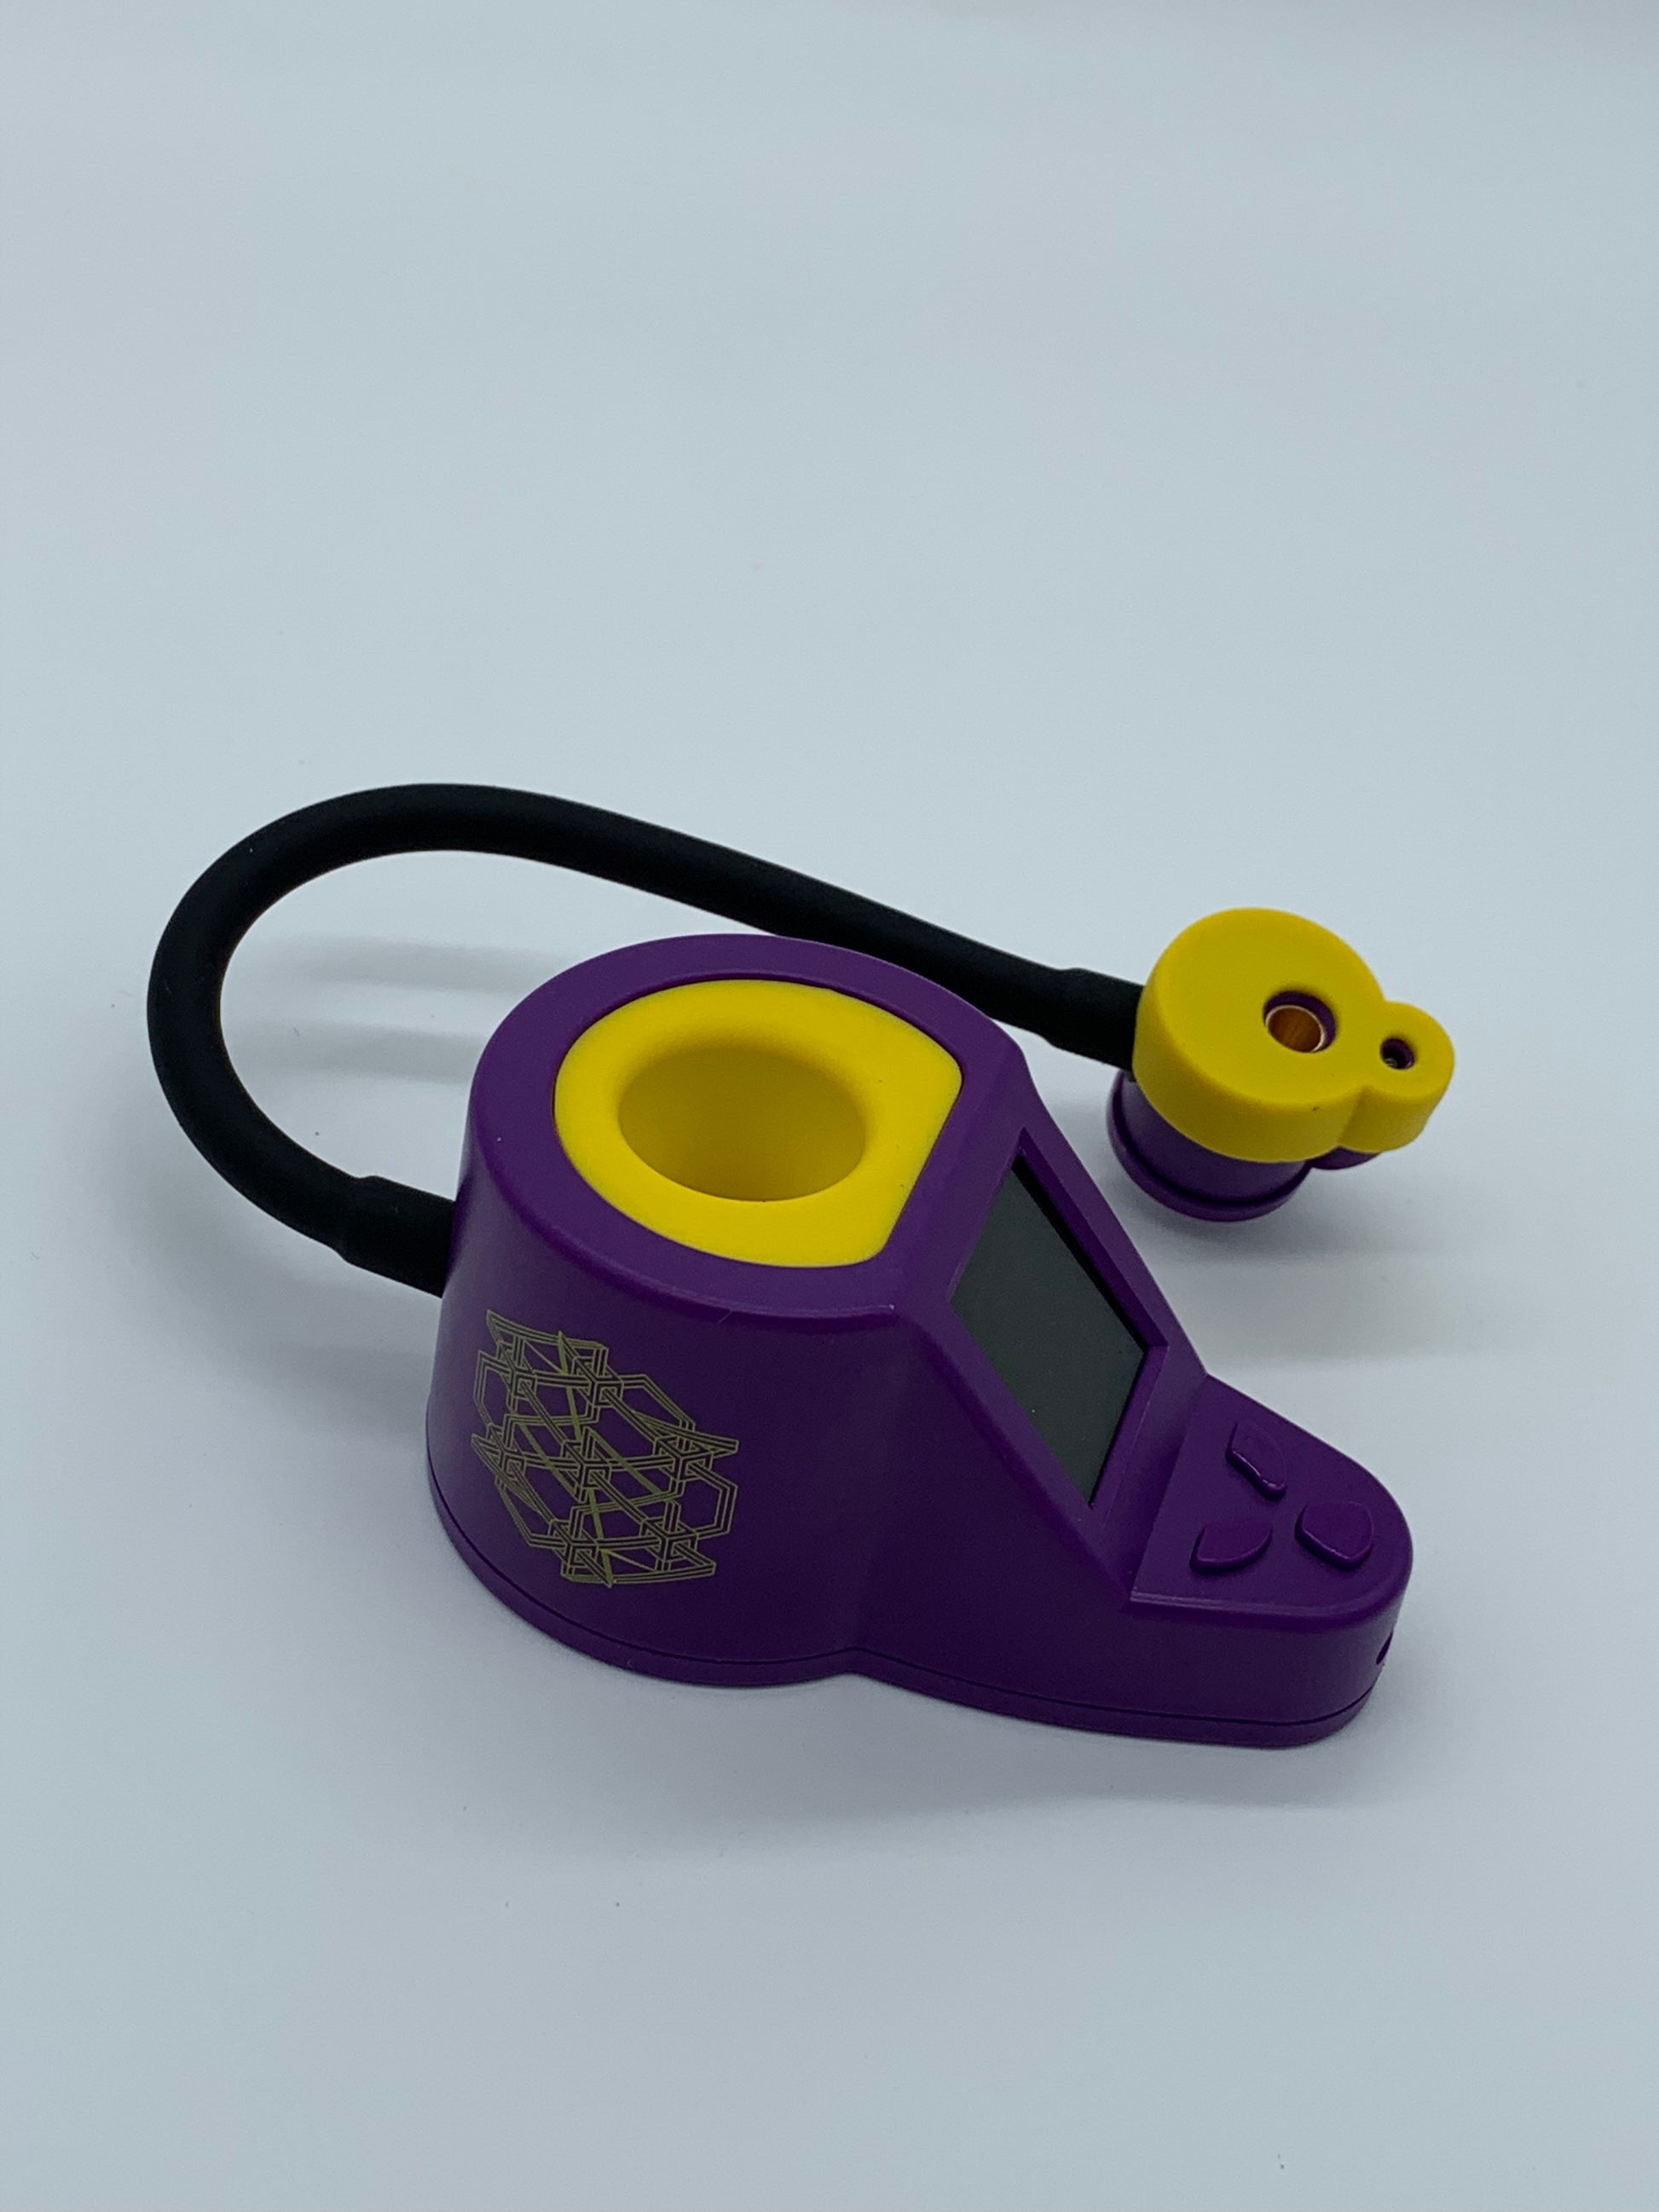 Dab Rite Digital IR Thermometer LIMITED EDITION Purple Exploding Cube